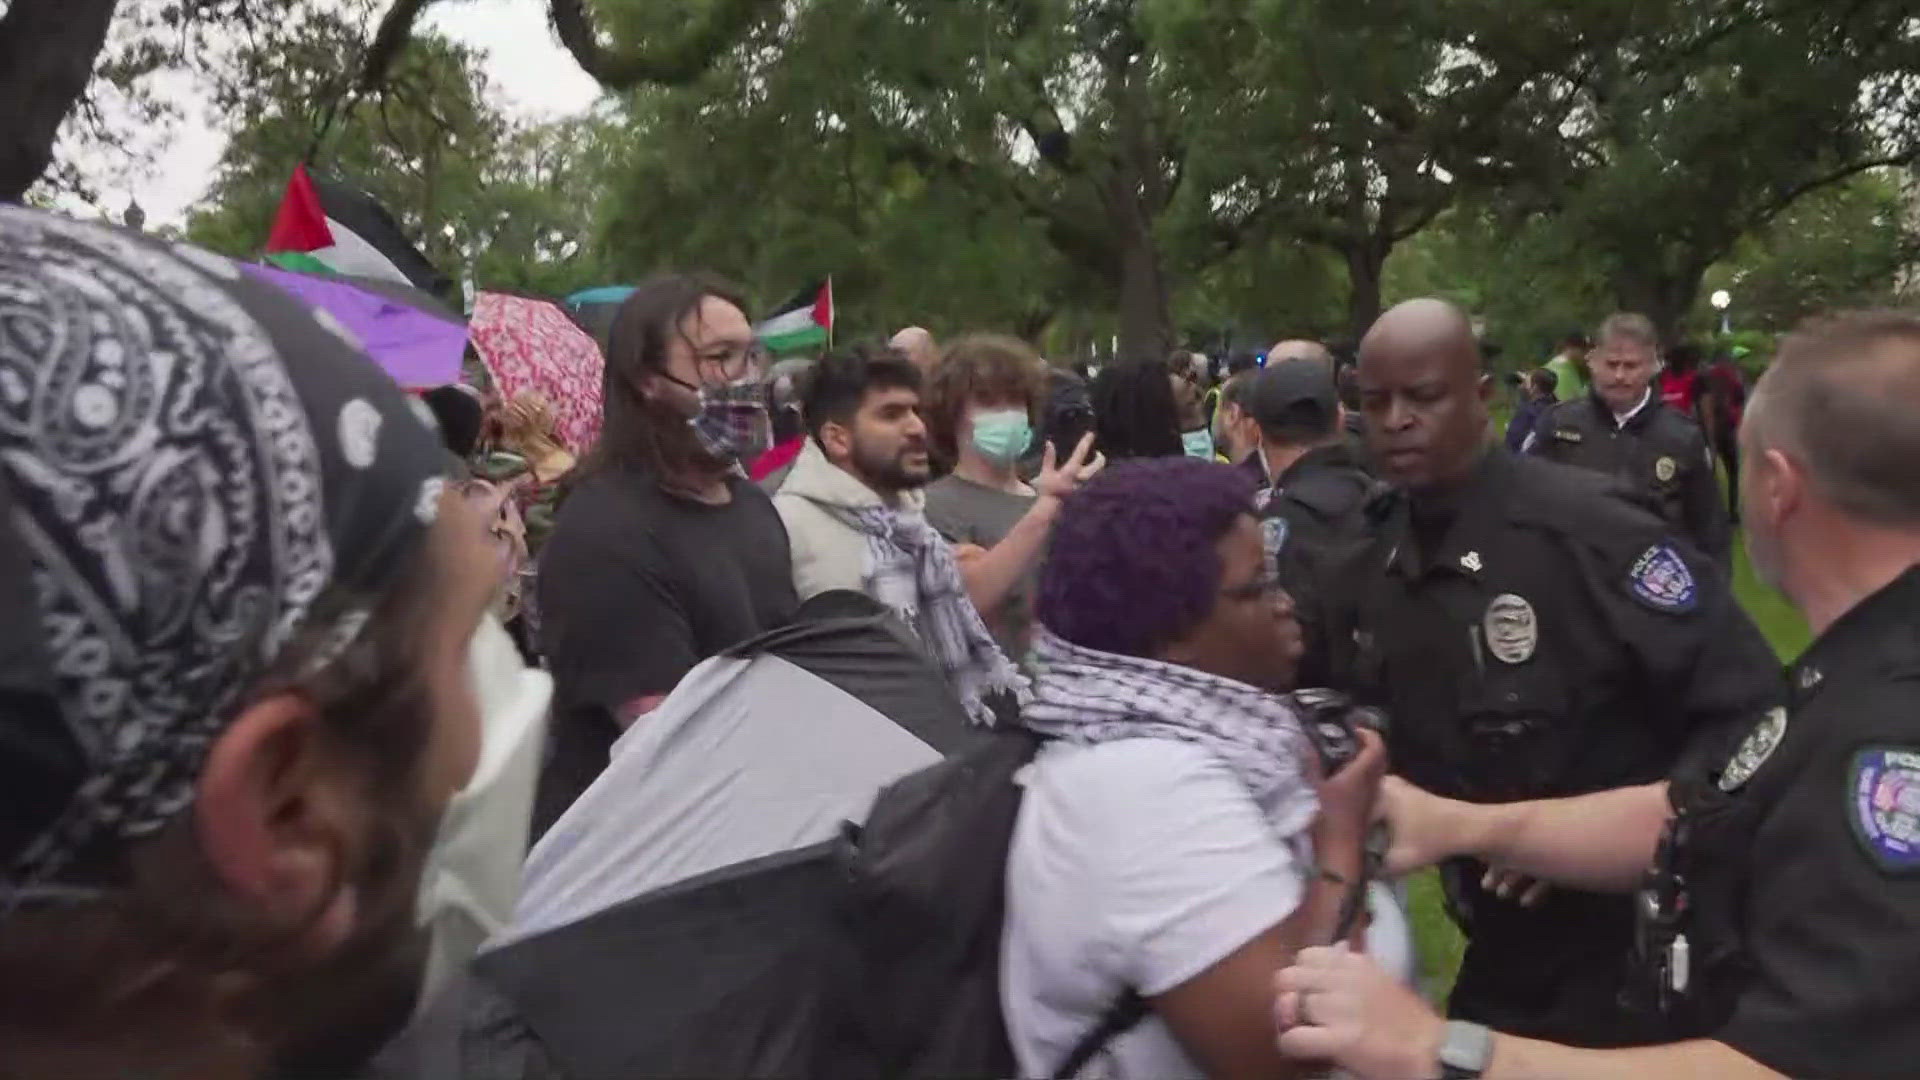 Protesters skirmish with police, attempt to put up tents on Tulane campus